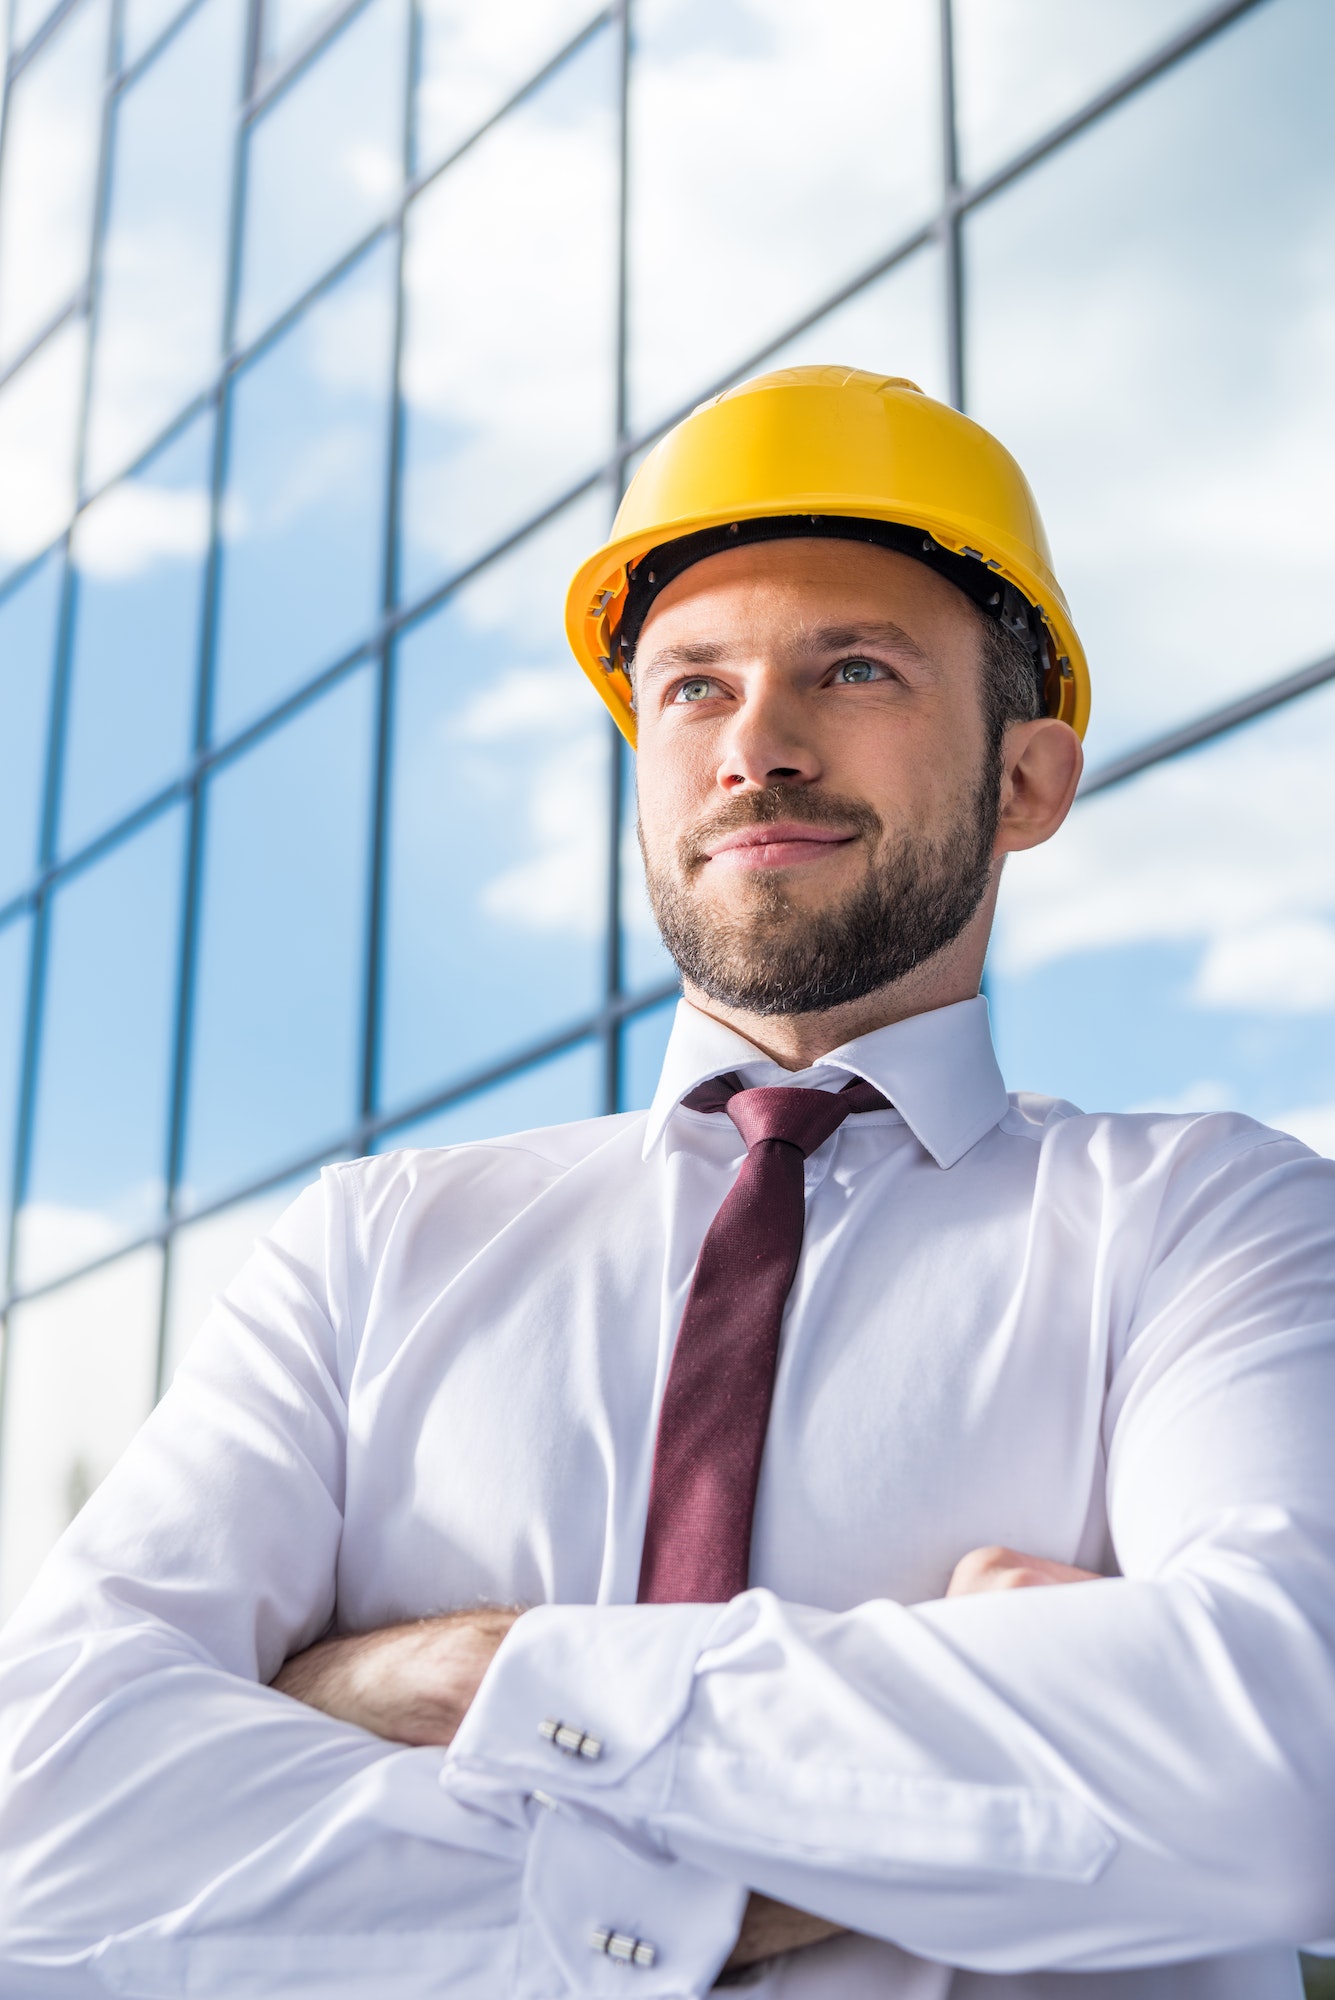 portrait of smiling professional architect in hard hat against building